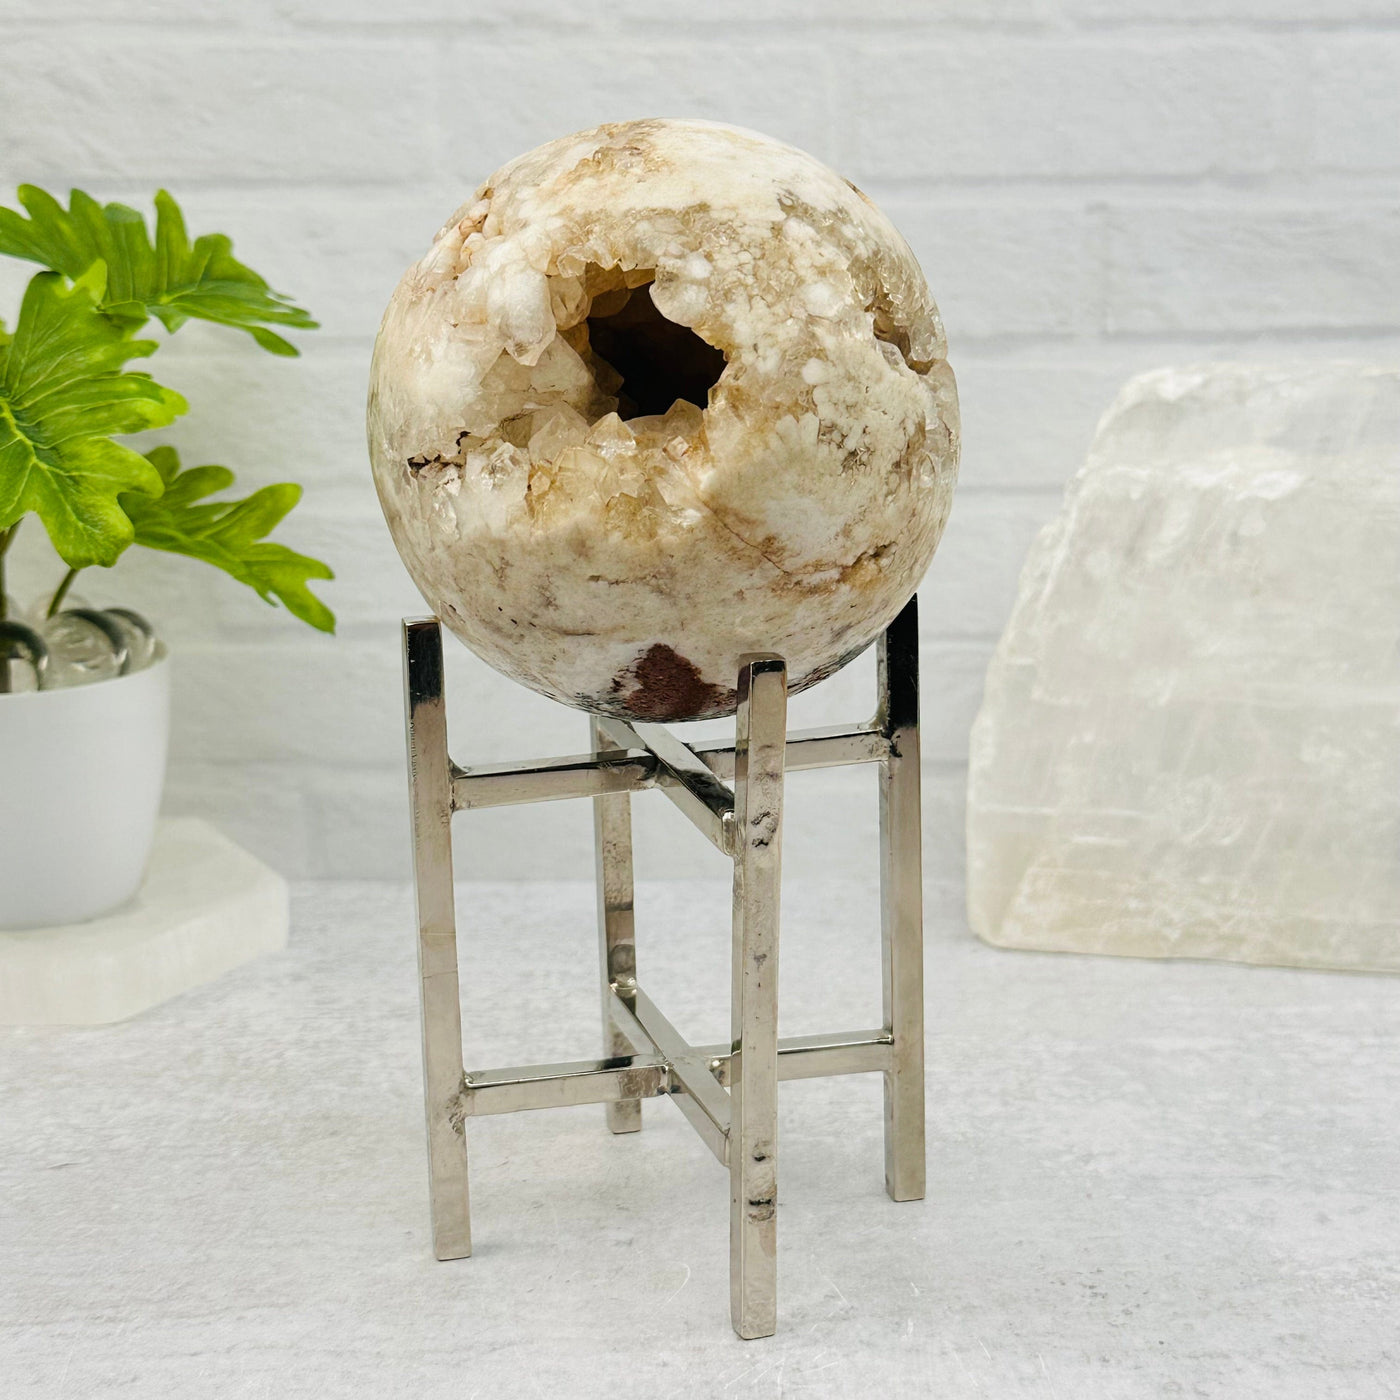 Crystal Sphere Stand displayed as home decor 